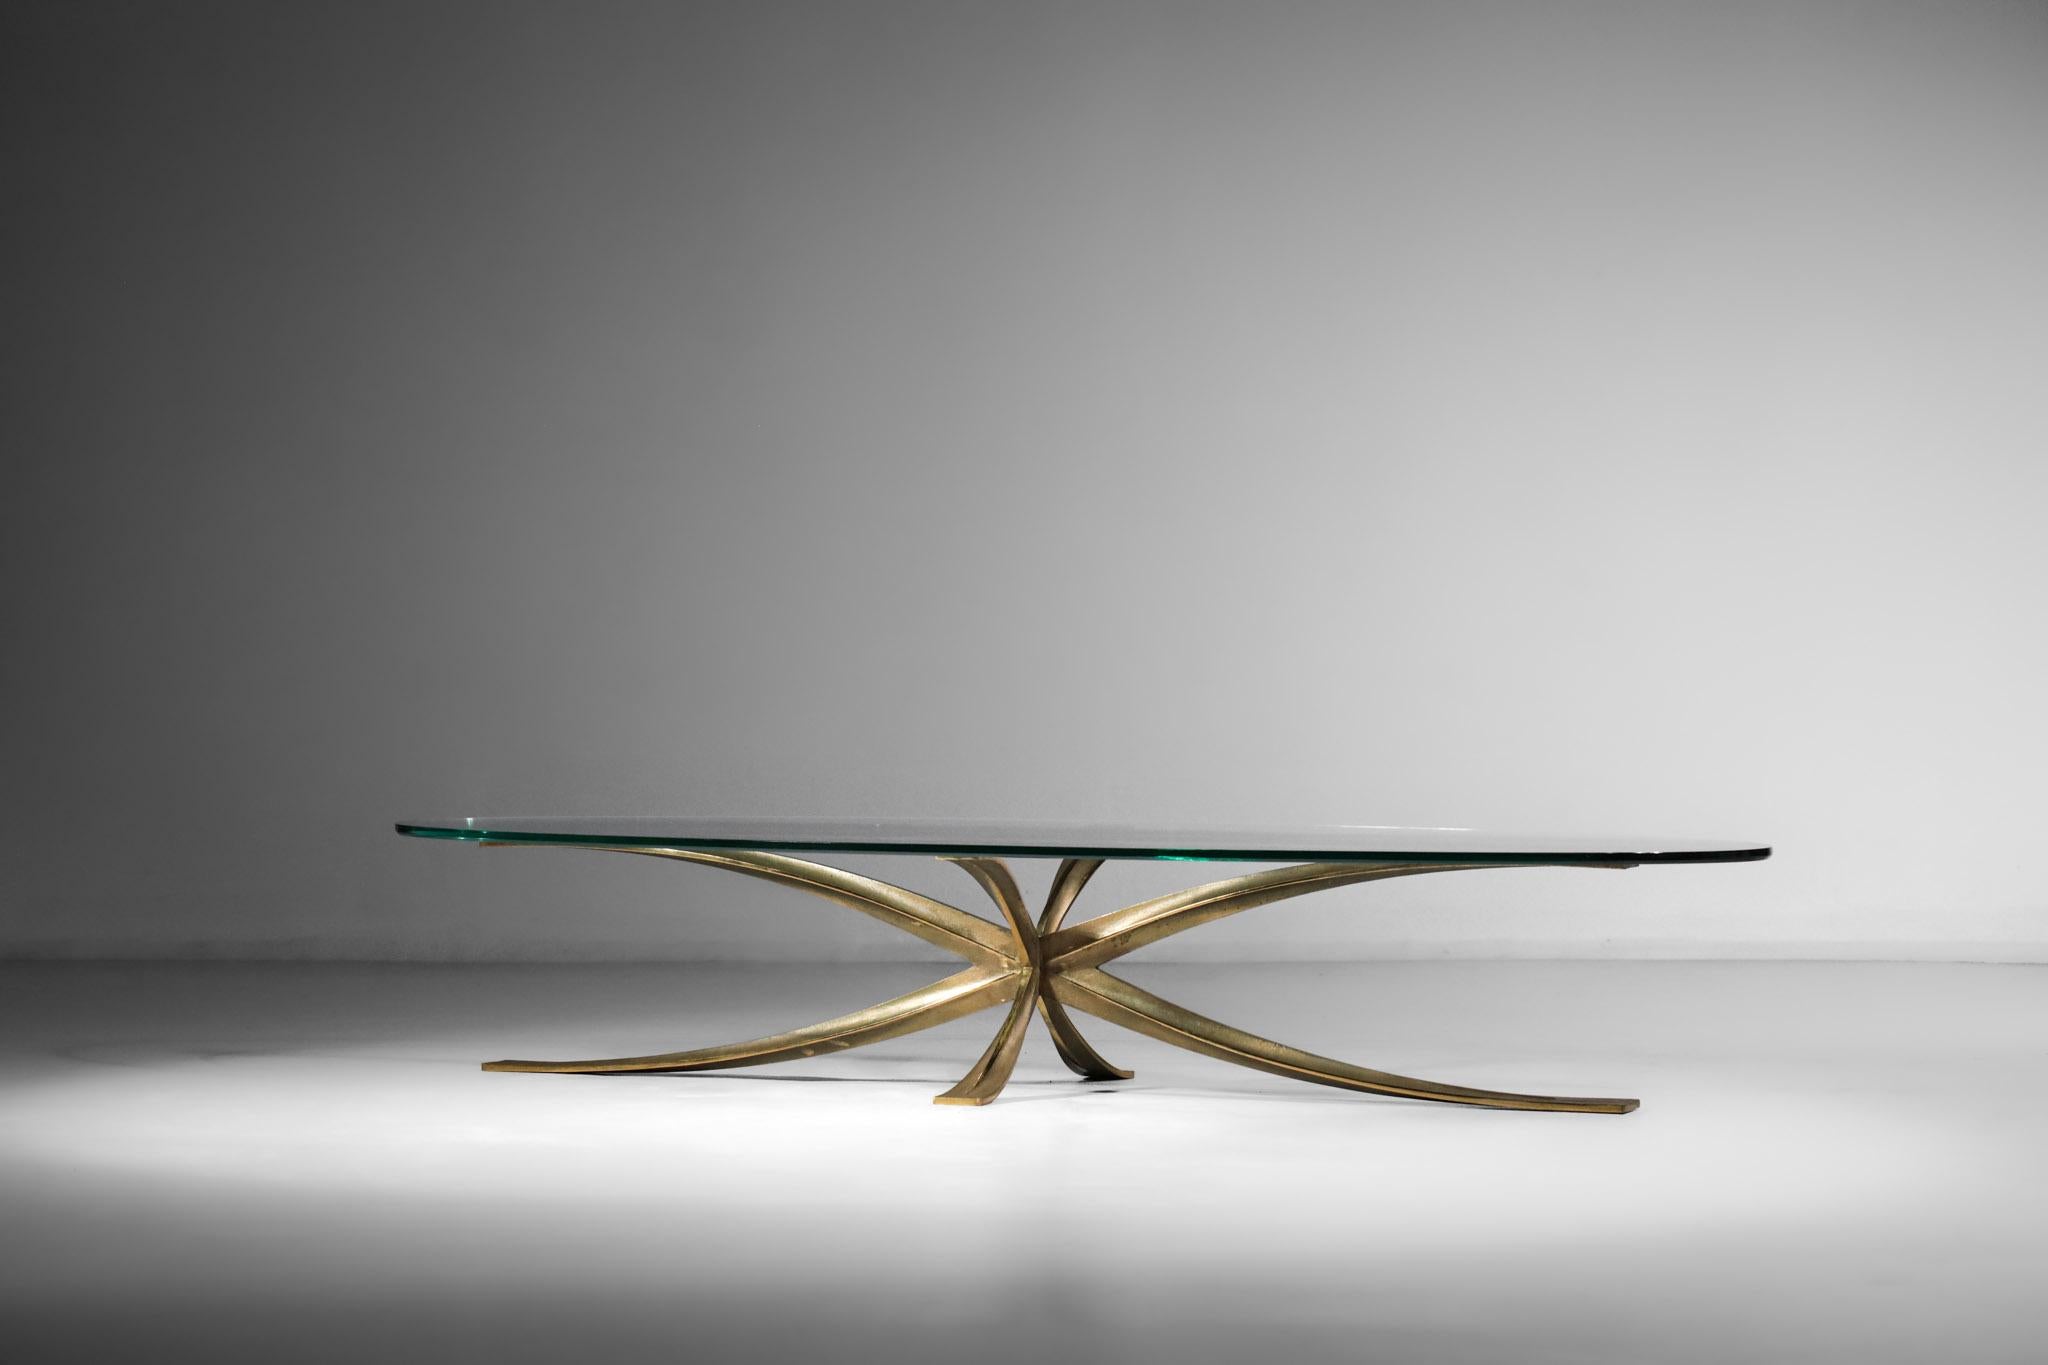 Large Michel Mangematin Coffee Table in Gilt Bronze and Oval Glass 1960's Design For Sale 10